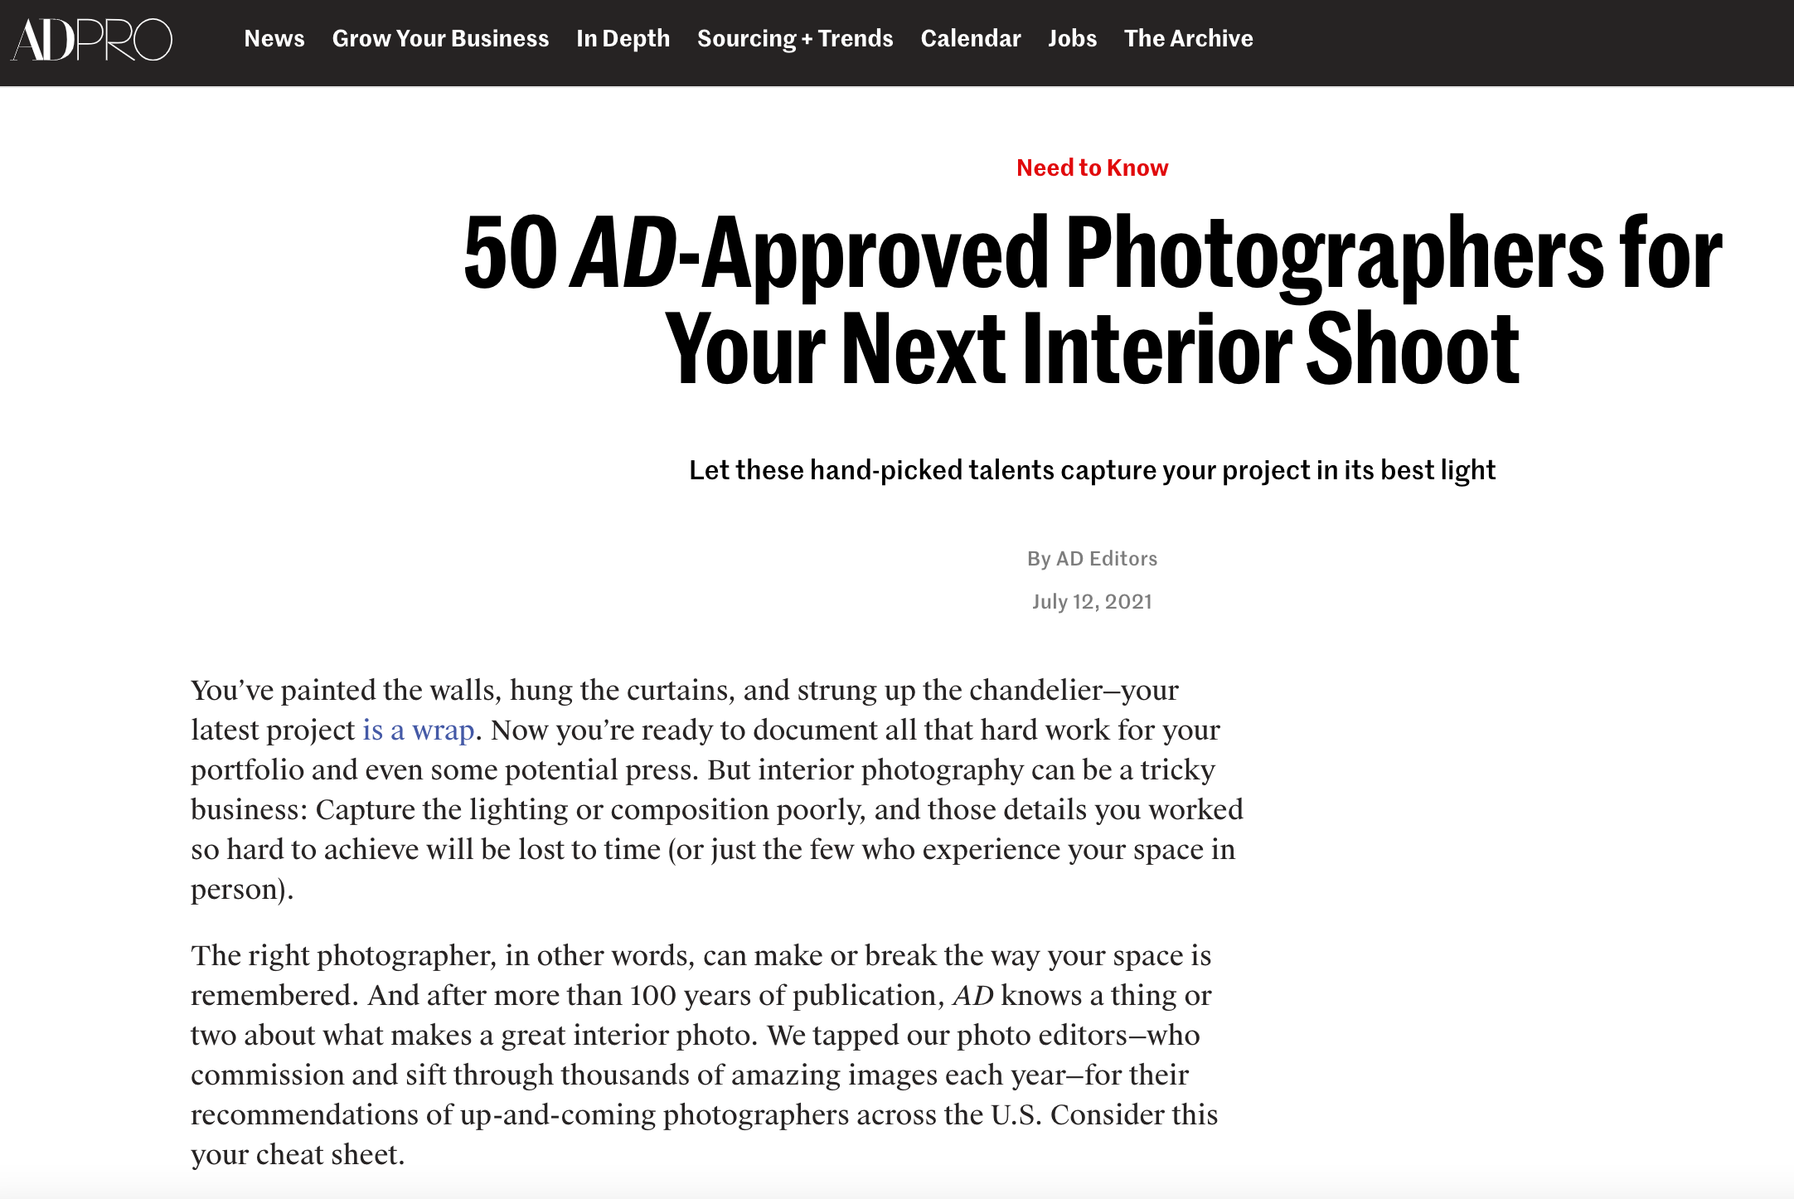 AD Pro article, "50 AD-Approved Photographers for Your Next Interior Shoot" with a recommendation for LA based photographer Petra Ford